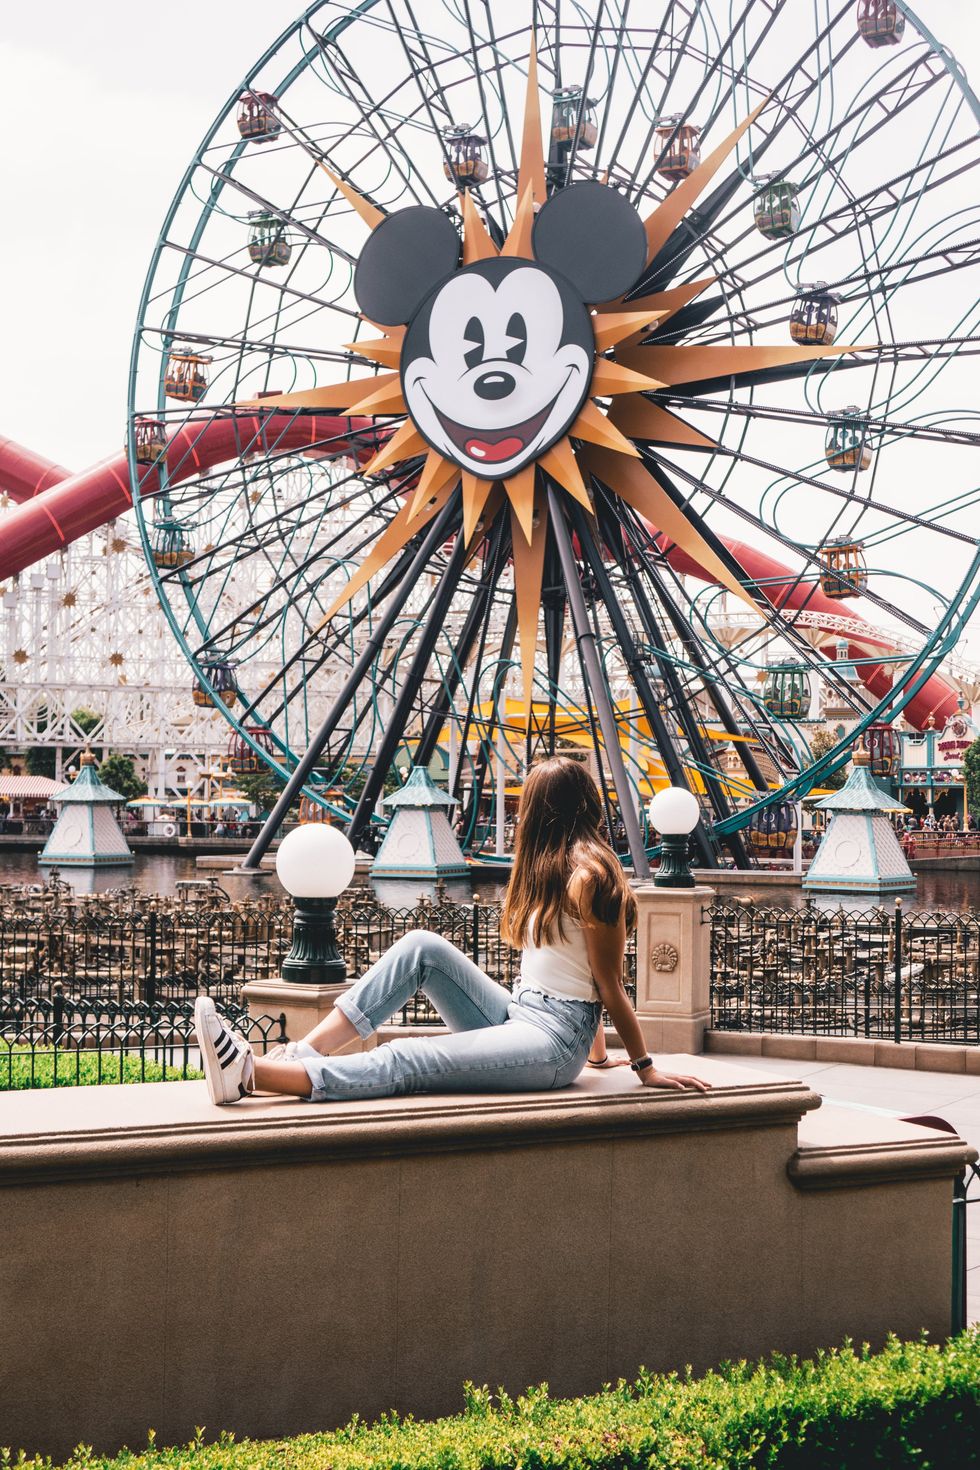 Millennials To Be Banned From Disney World, Why?